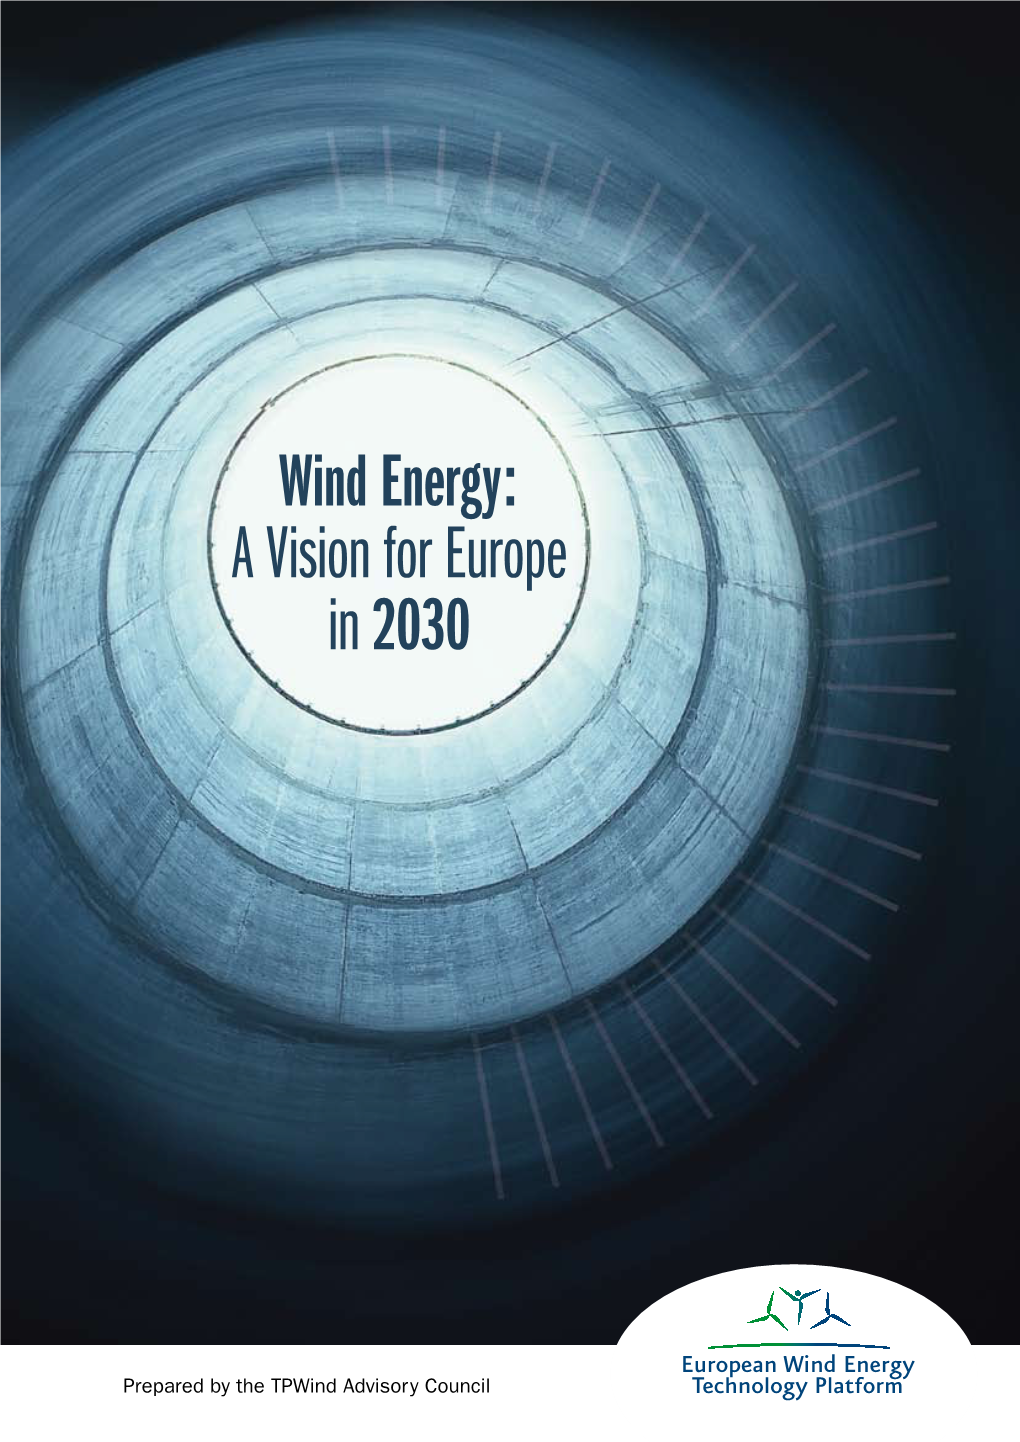 Wind Energy: a Vision for Europe in 2030